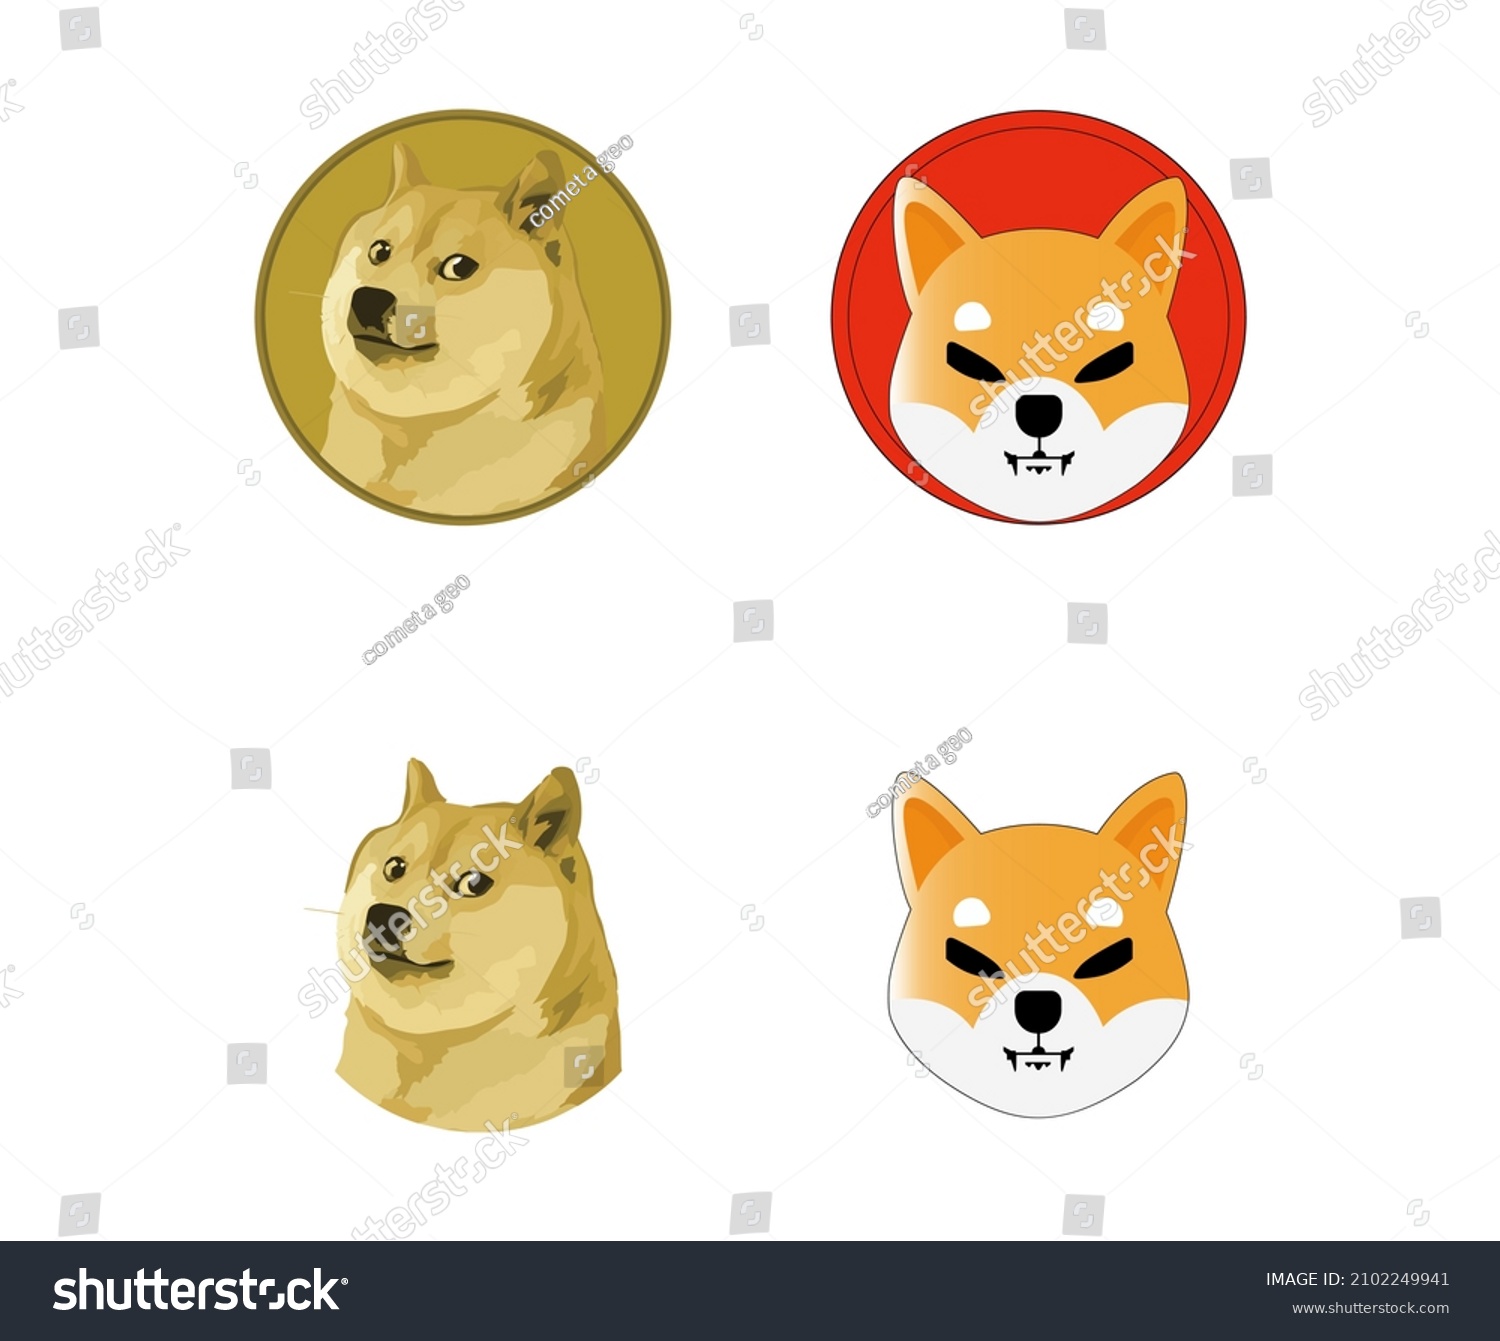 SVG of Symbol of cryptocurrency, symbol of Dogecoin and Shiba Inu. Vector svg